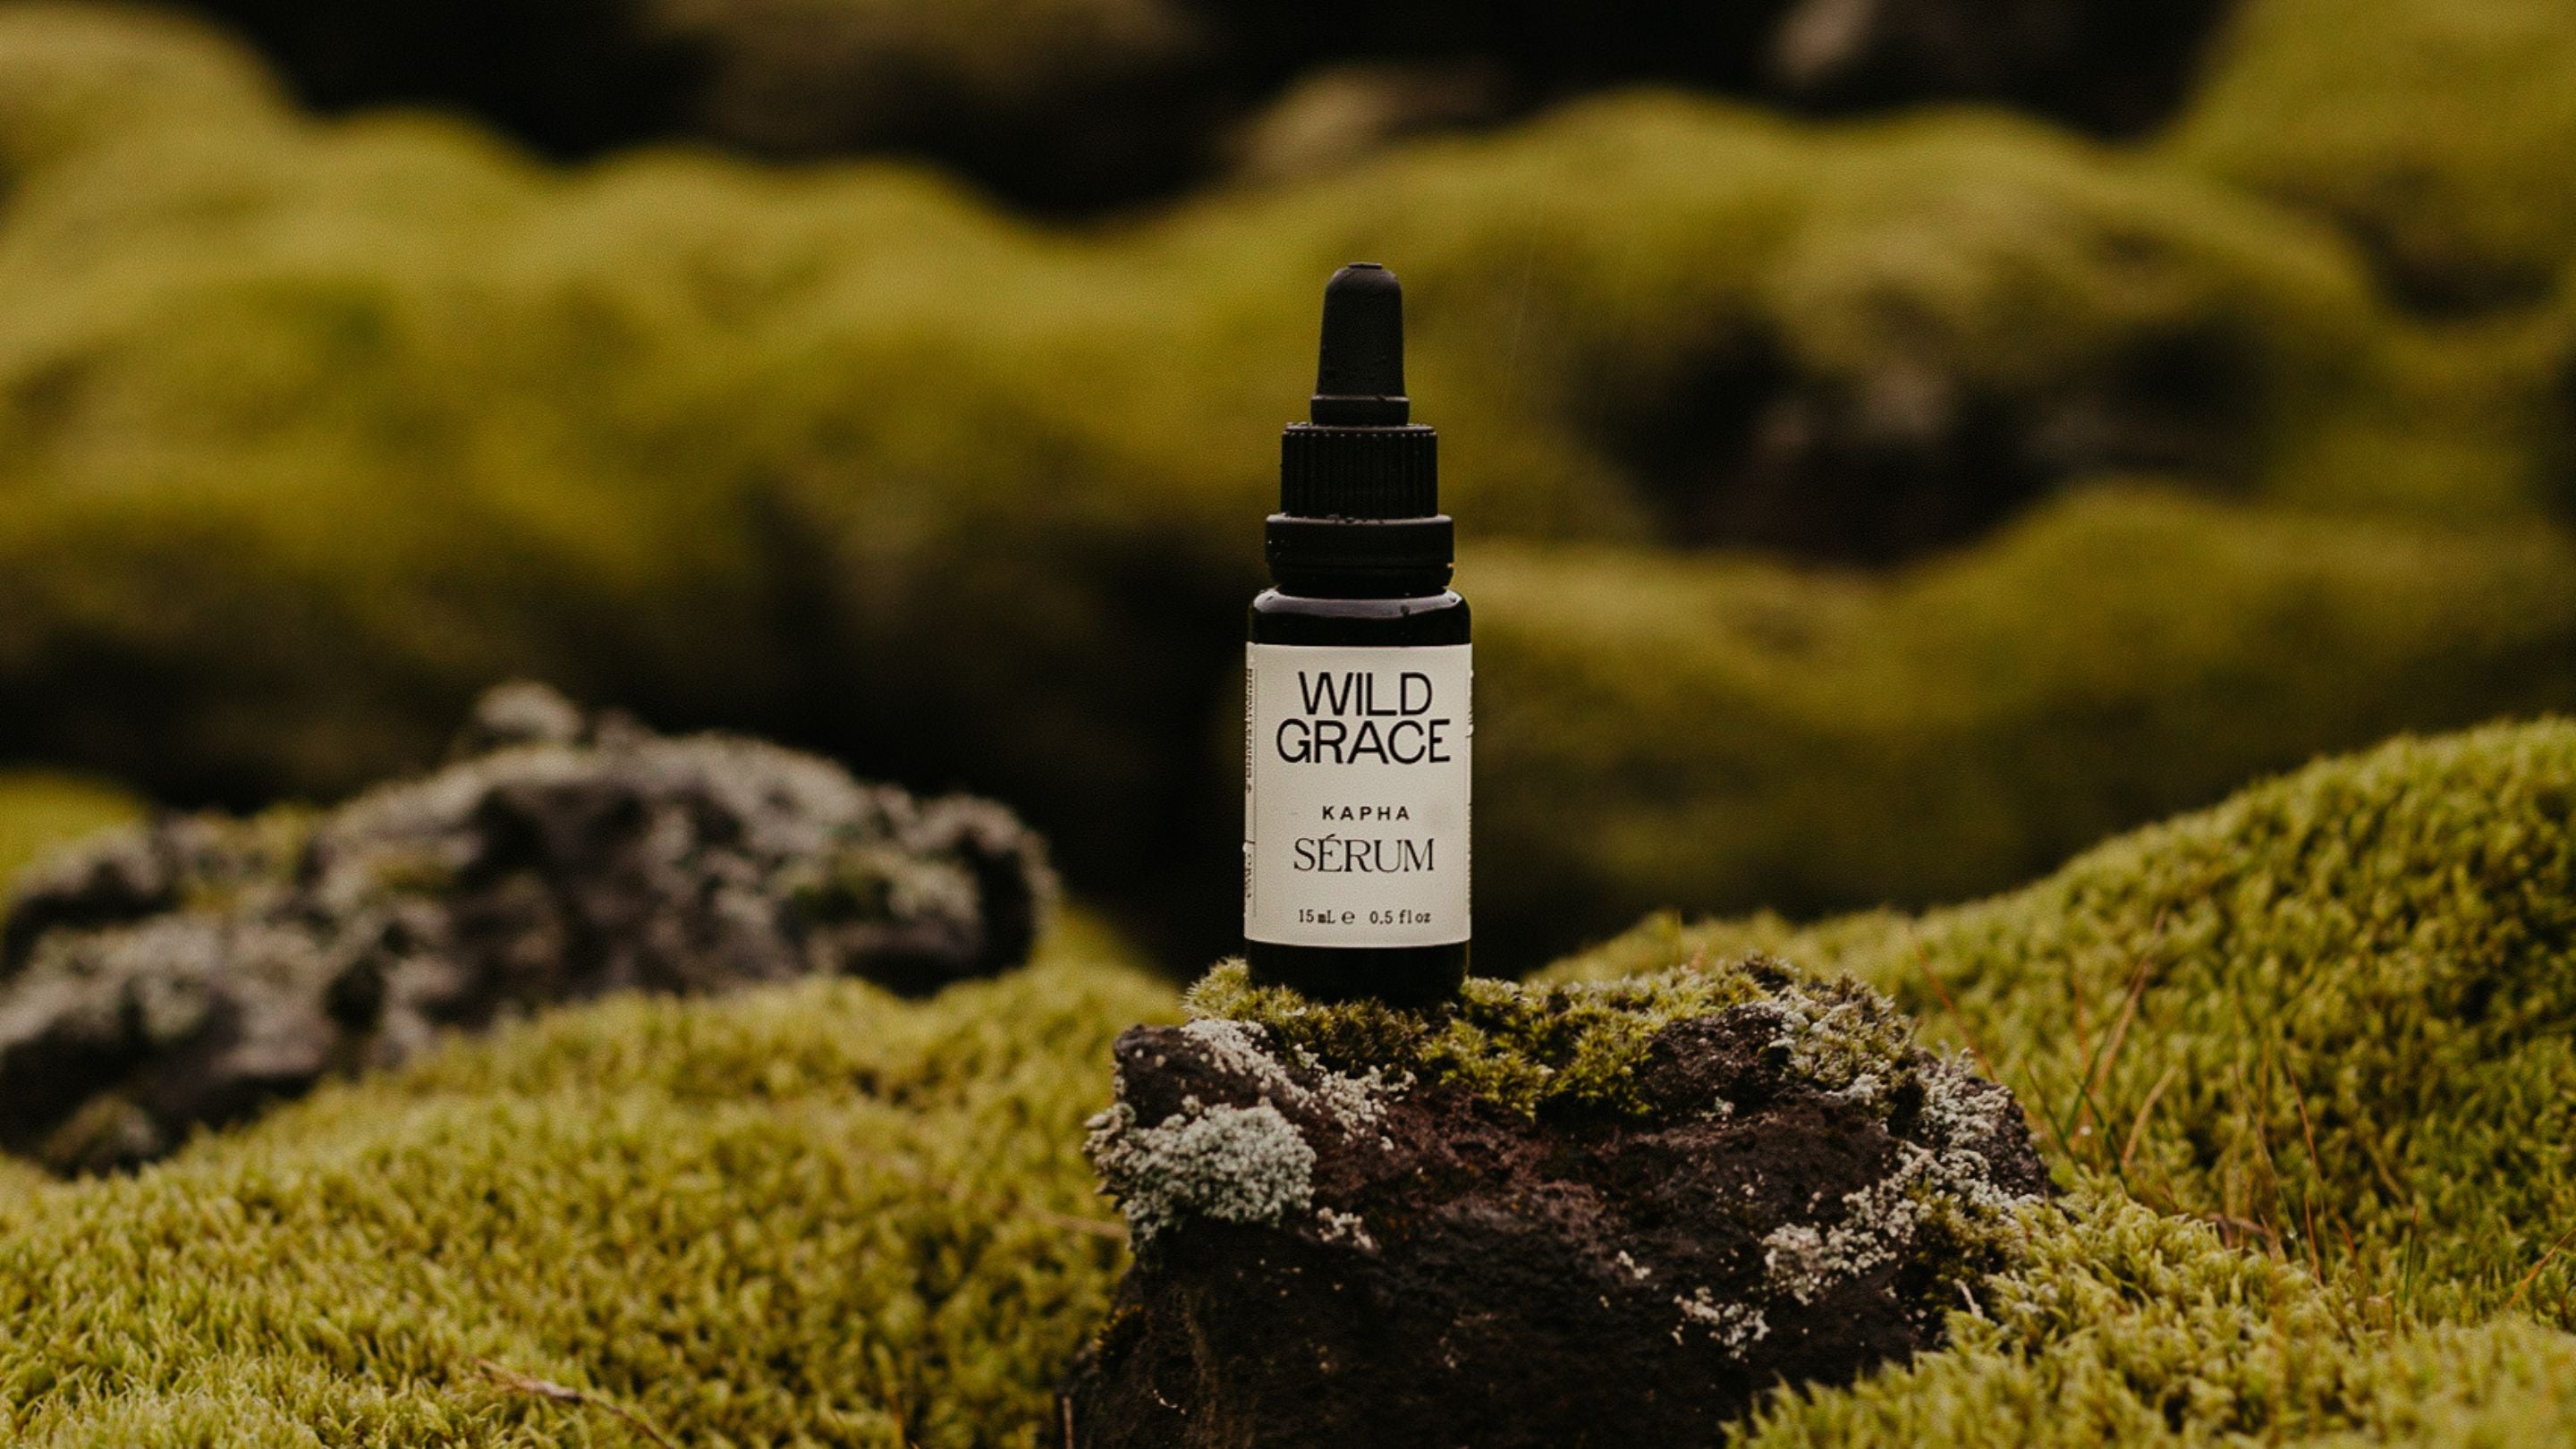 WILD GRACE natural skincare crafted in Montreal, Canada. Cruelty-free, vegan, eco-luxe every day rituals.